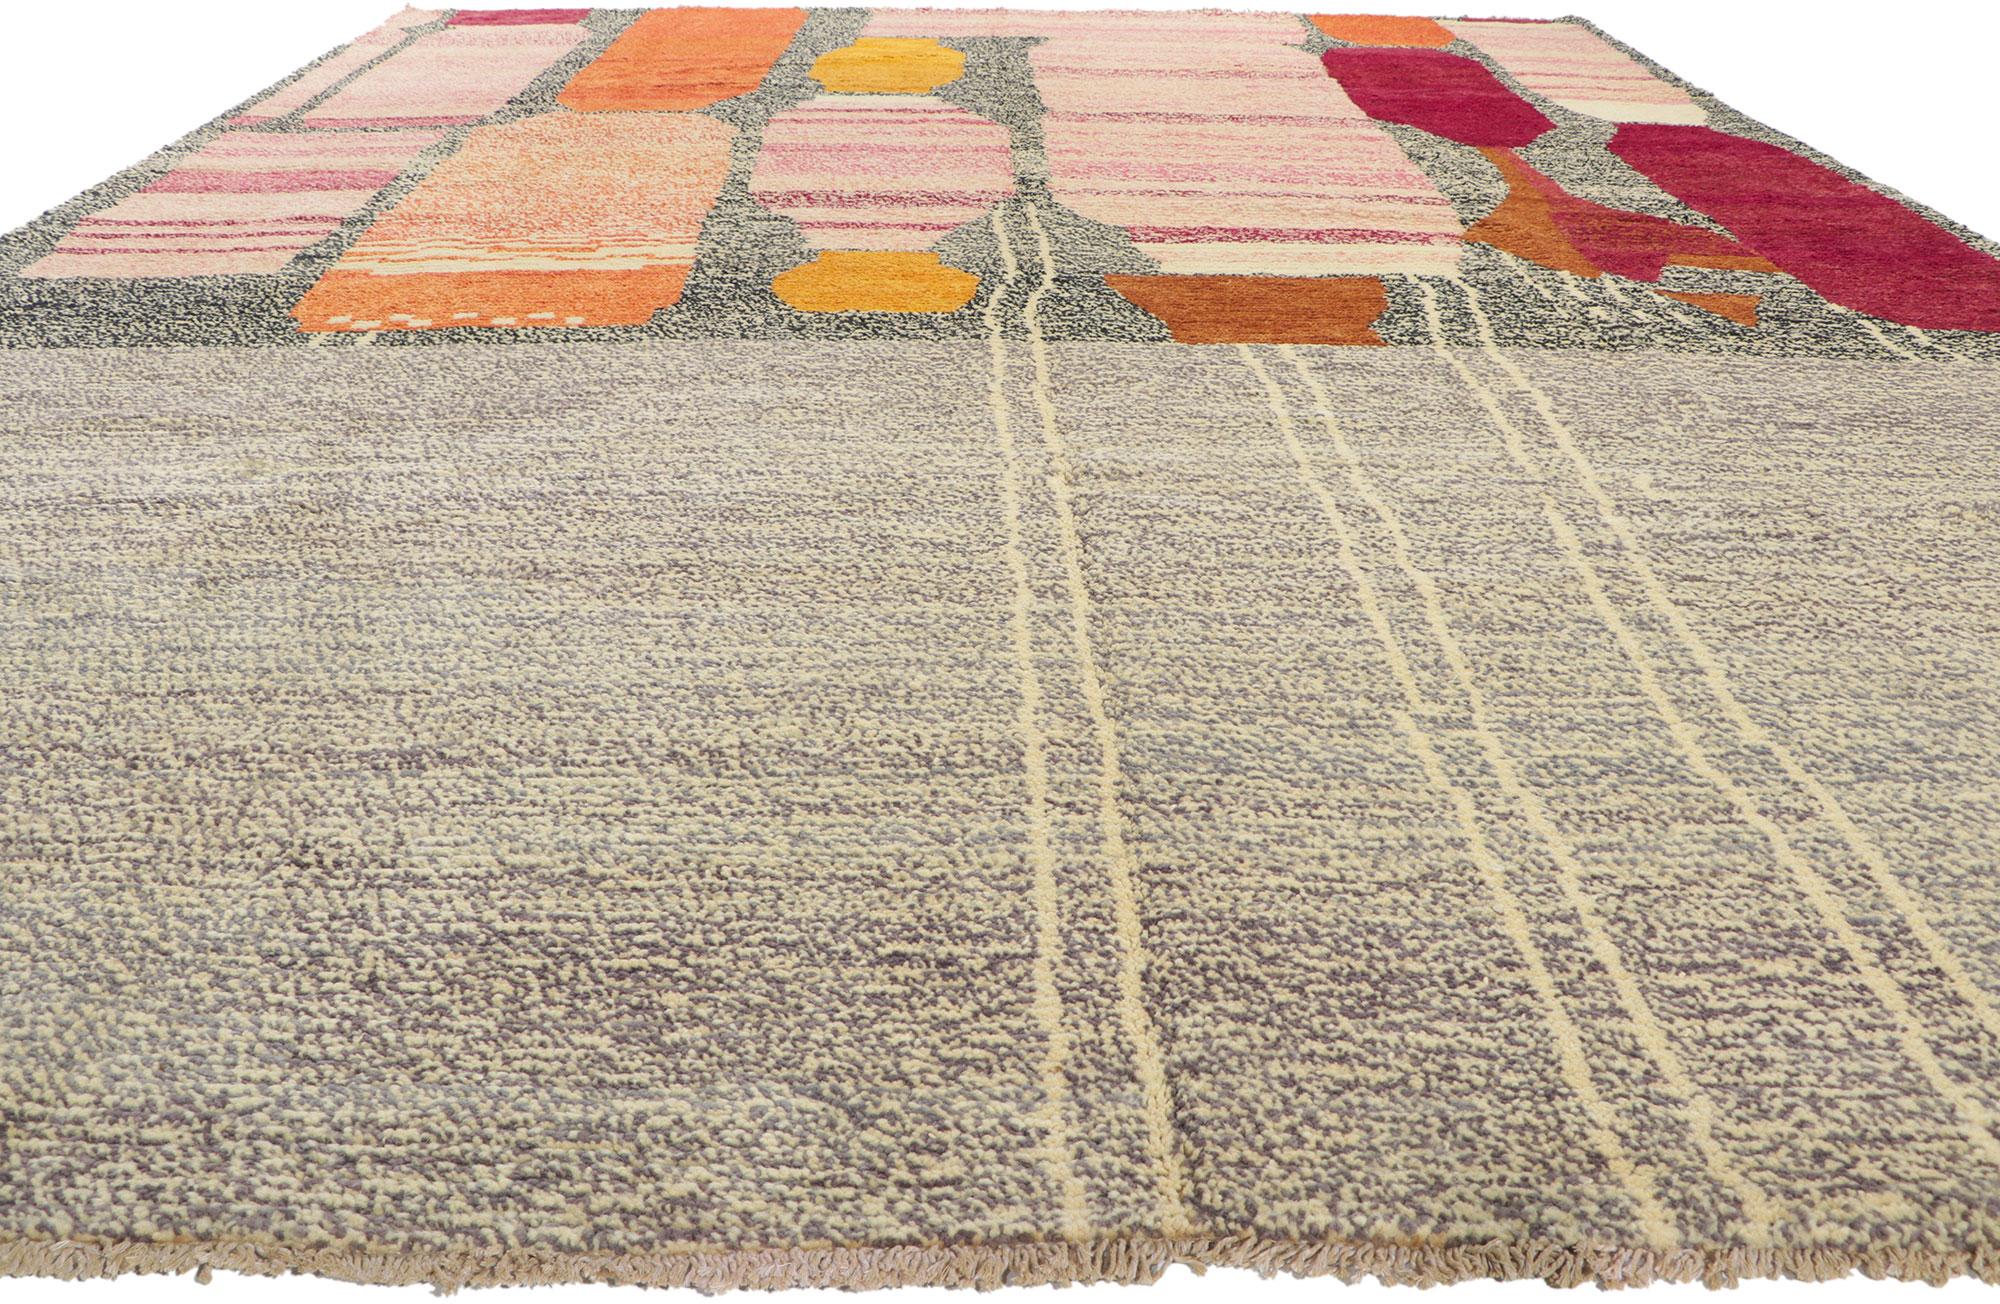 Post-Modern Modern Moroccan Rug Inspired by Paul Klee, Cubism Meets Ultra Cozy For Sale